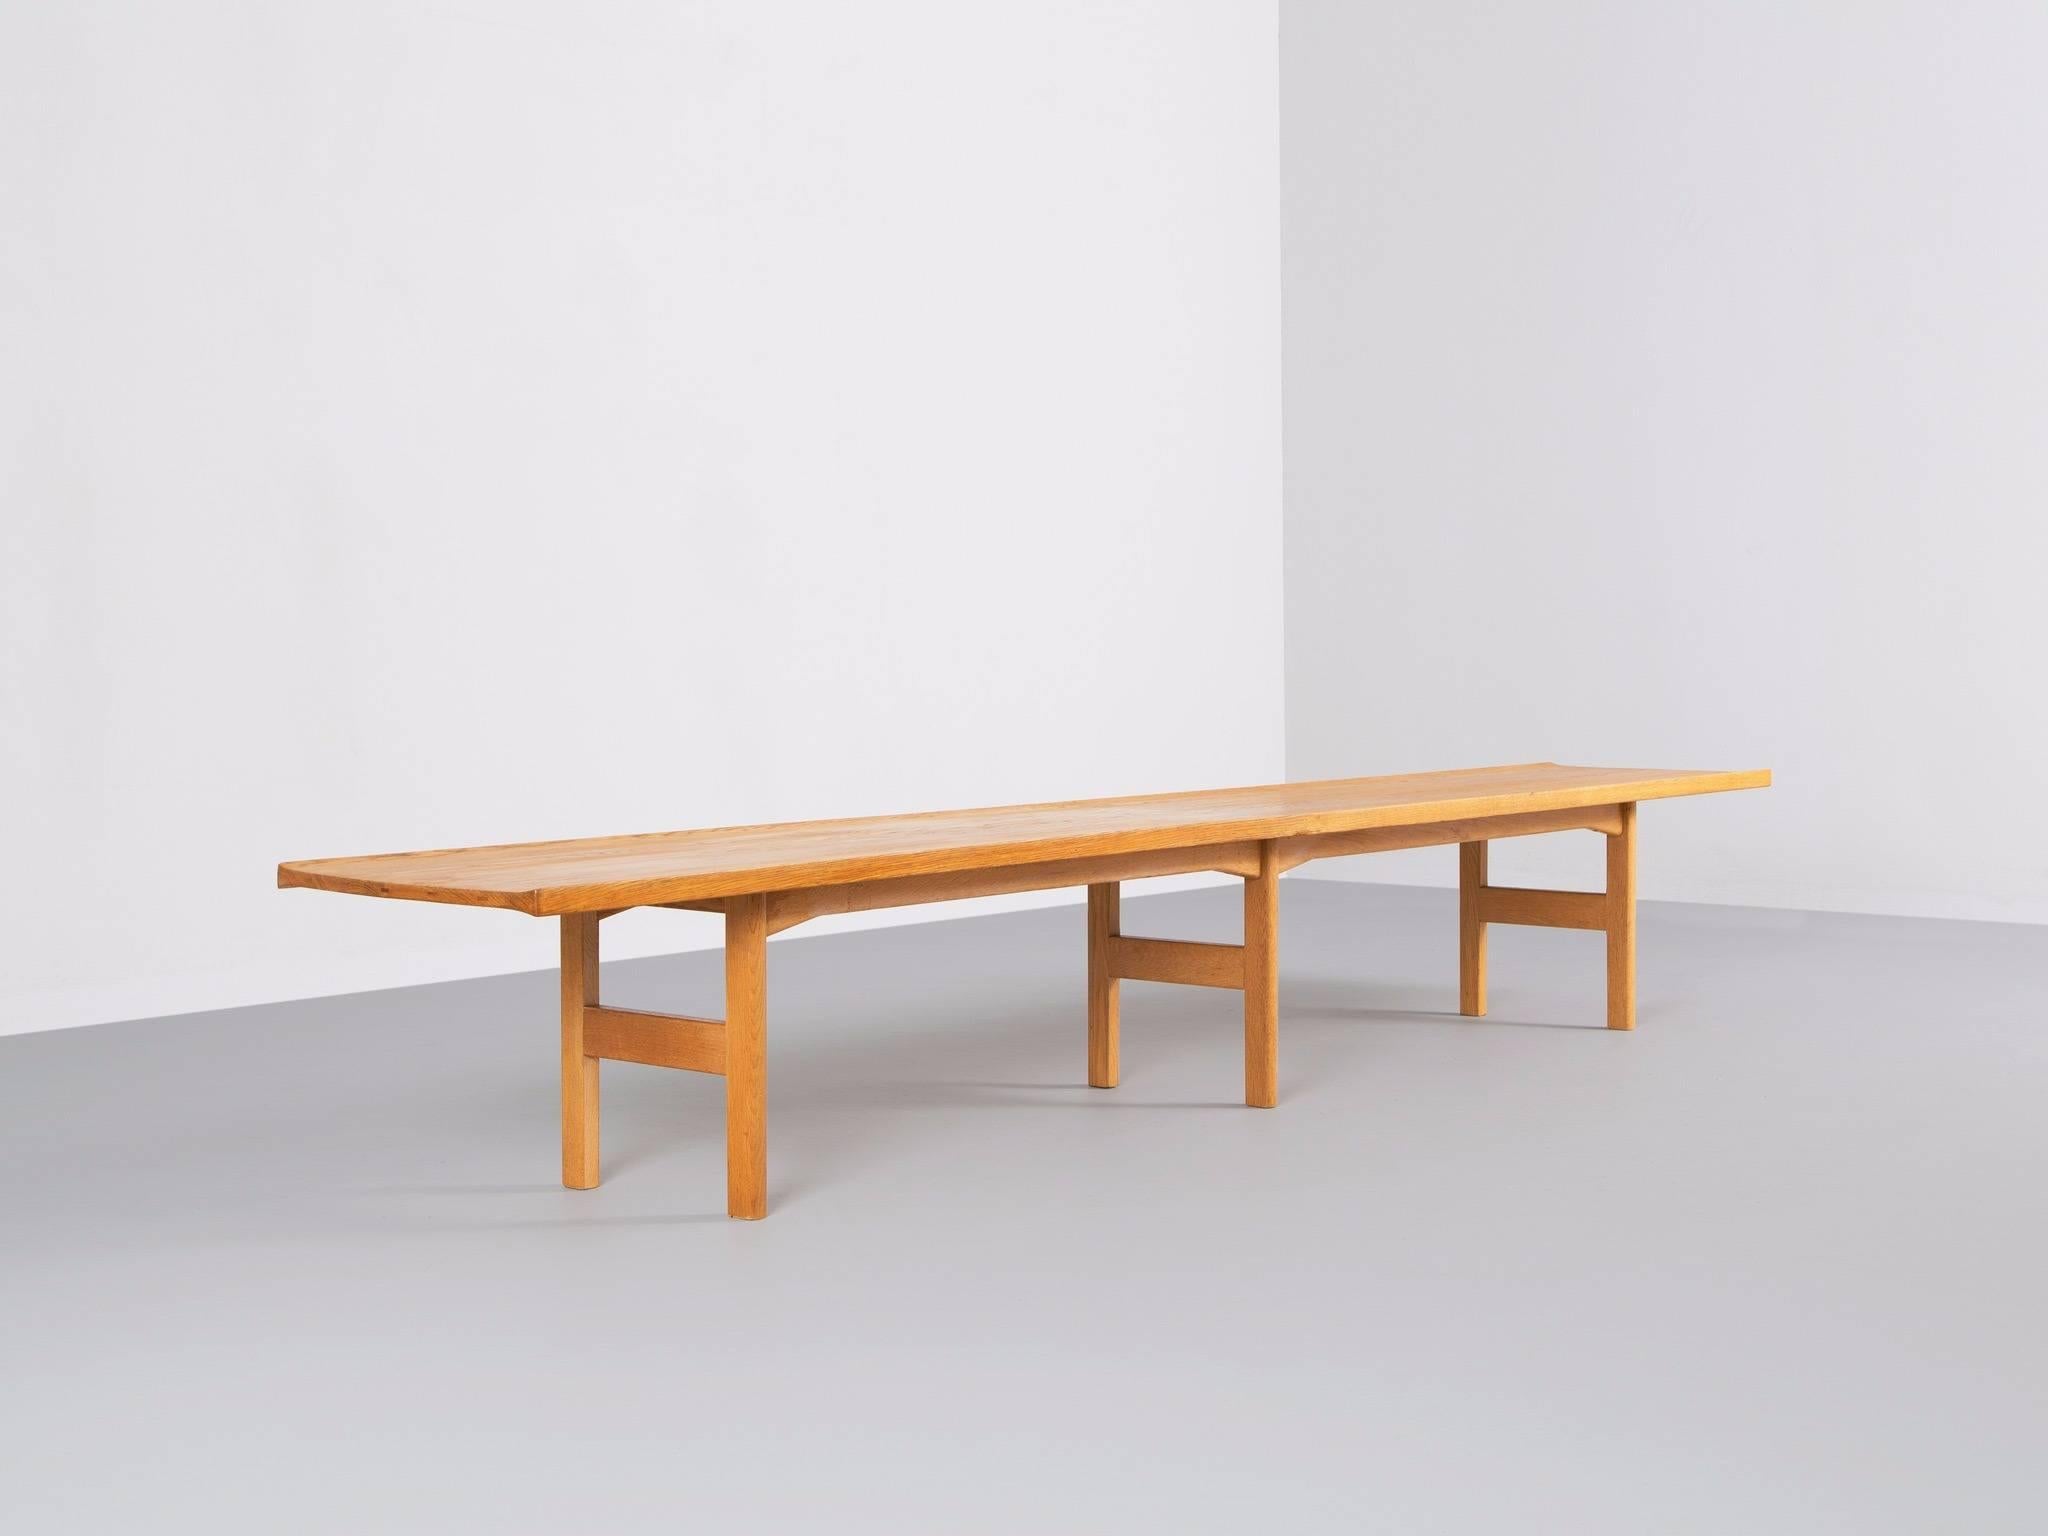 Tove and Edvard Kindt Larsen, bench, oak, Denmark, 1960s. 

Long bench in solid oak. This bench was designed by the couple Tove and Edvard Kindt Larsen. Nicely detailed surface or seating and three legs H-shaped legs. The grain of the oak is